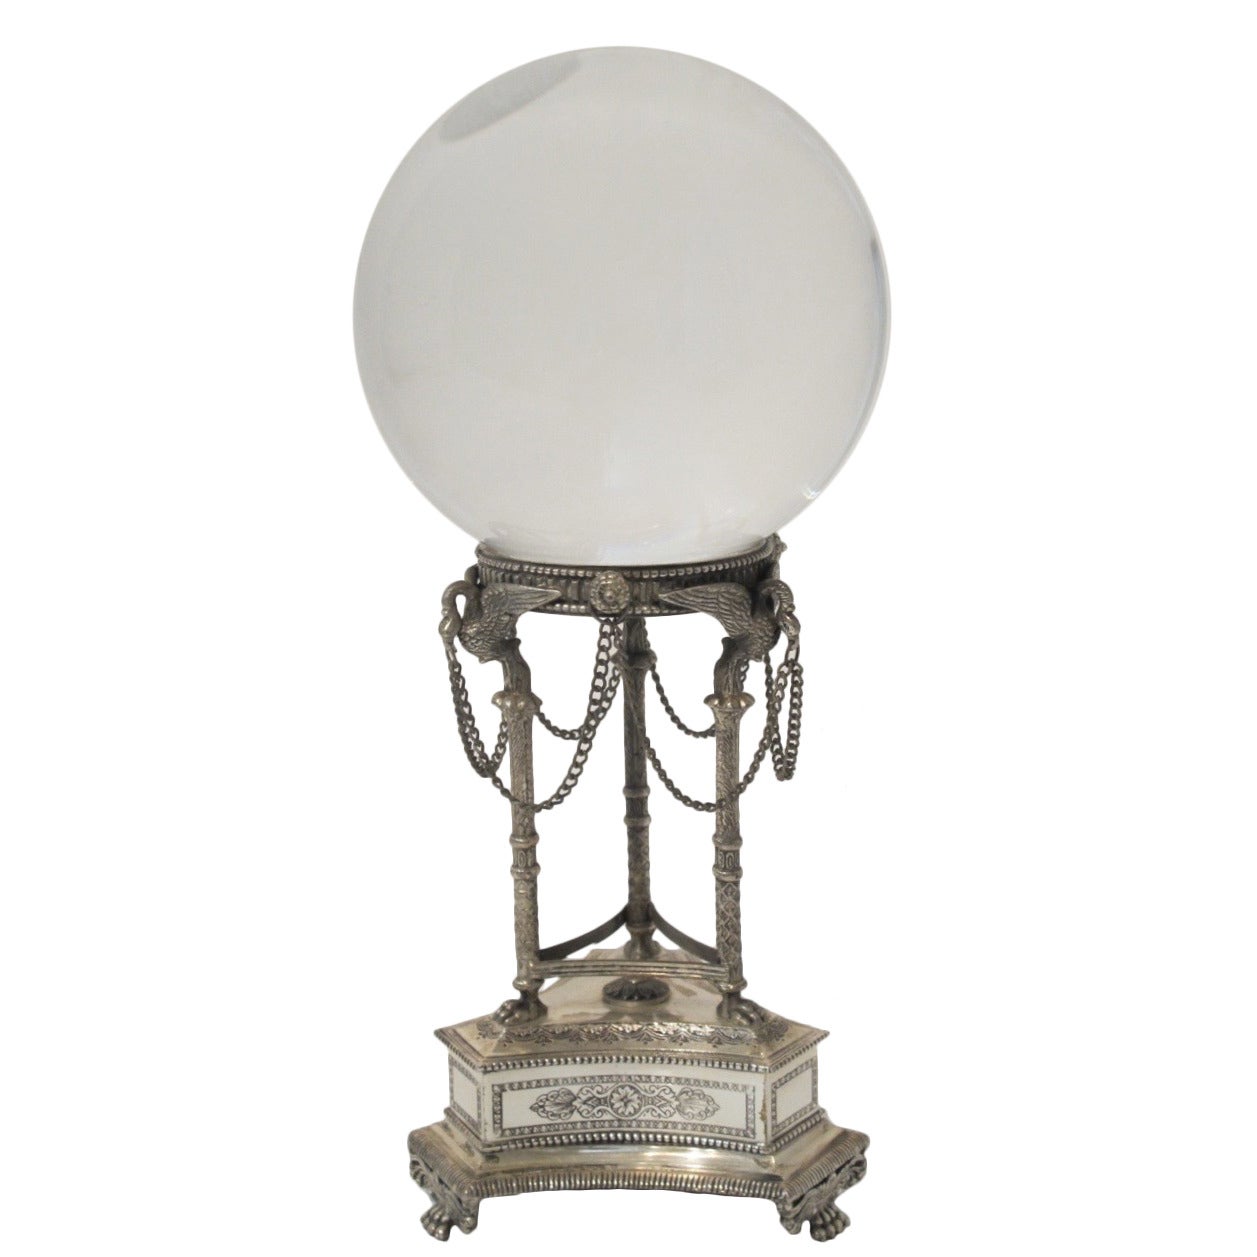 Glass Sphere on Neoclassical Stand